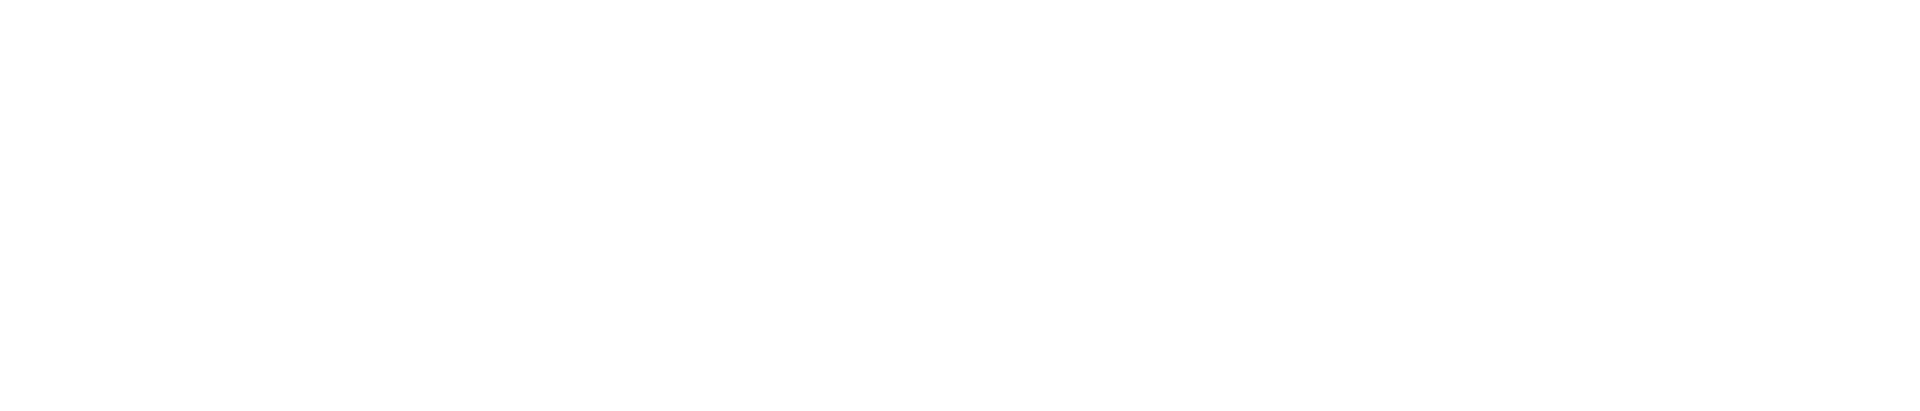 Spears Equipment Sales and Service, Inc. logo